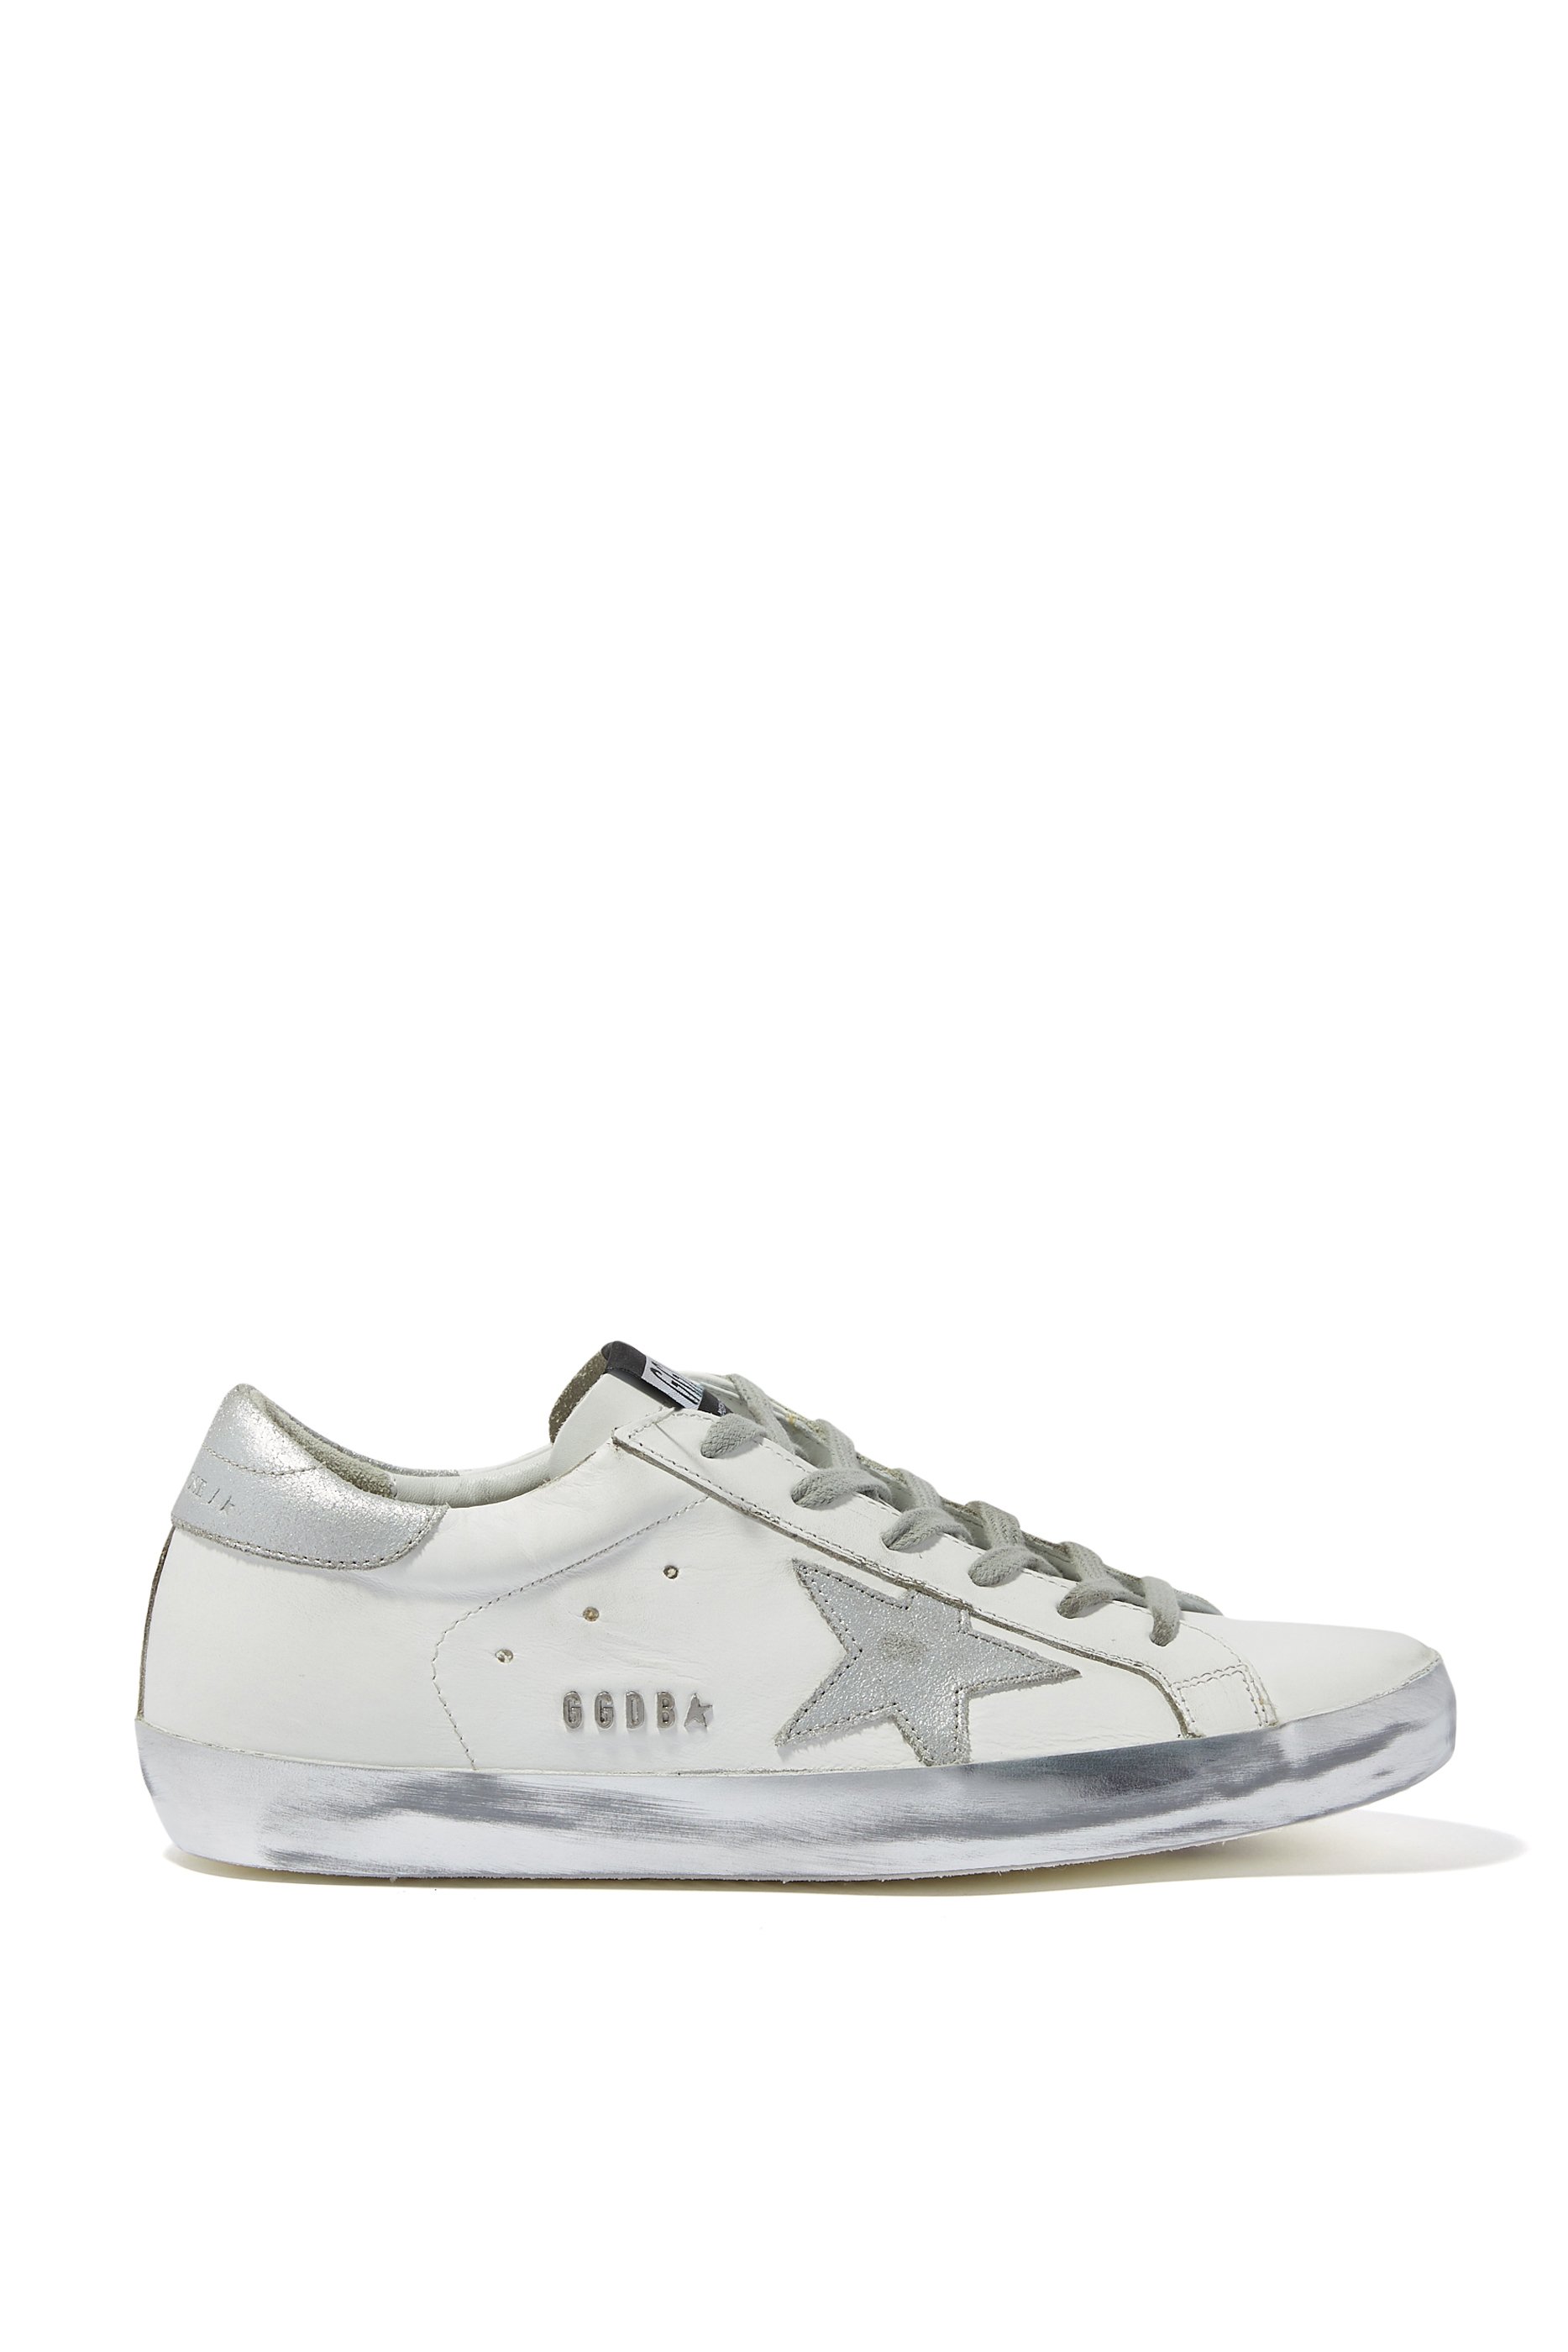 Buy Golden Goose Silver Sparkle Superstar Sneakers for Womens ...